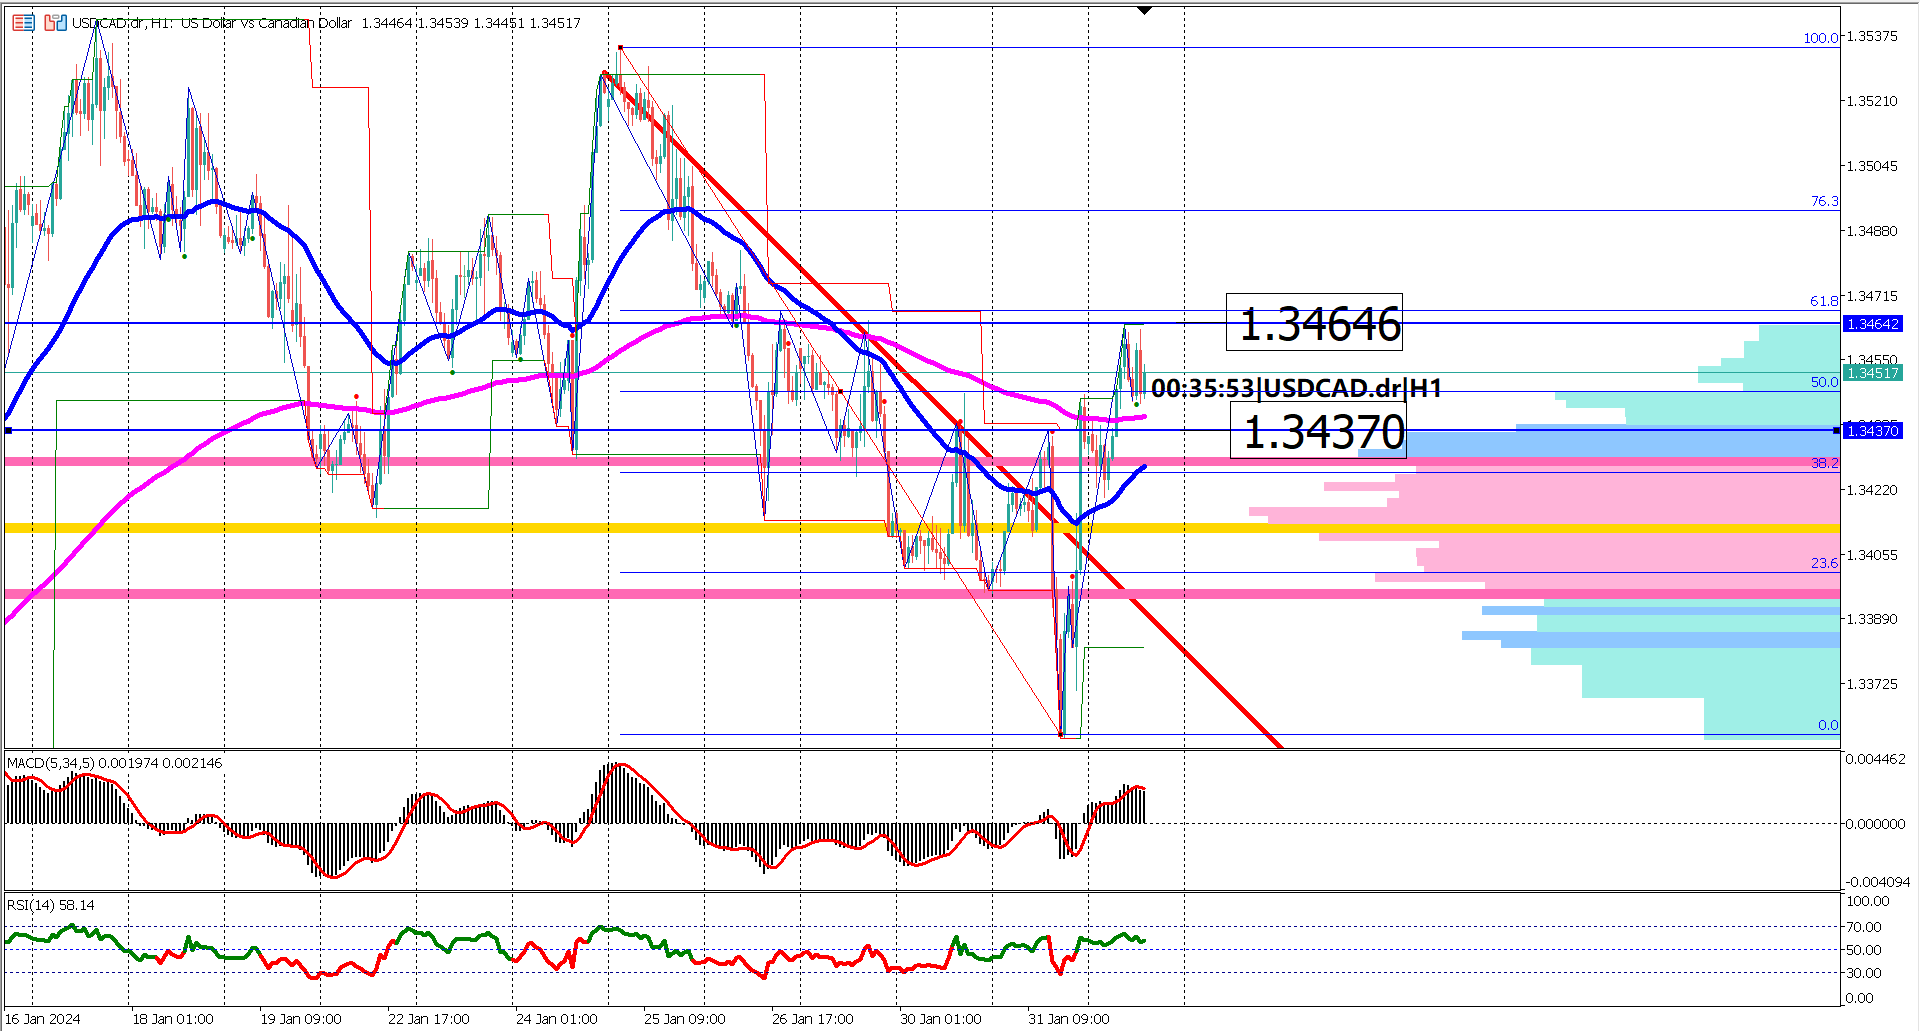 USDCAD Rebounds: Charting the Course for a Potential Bullish Reversal